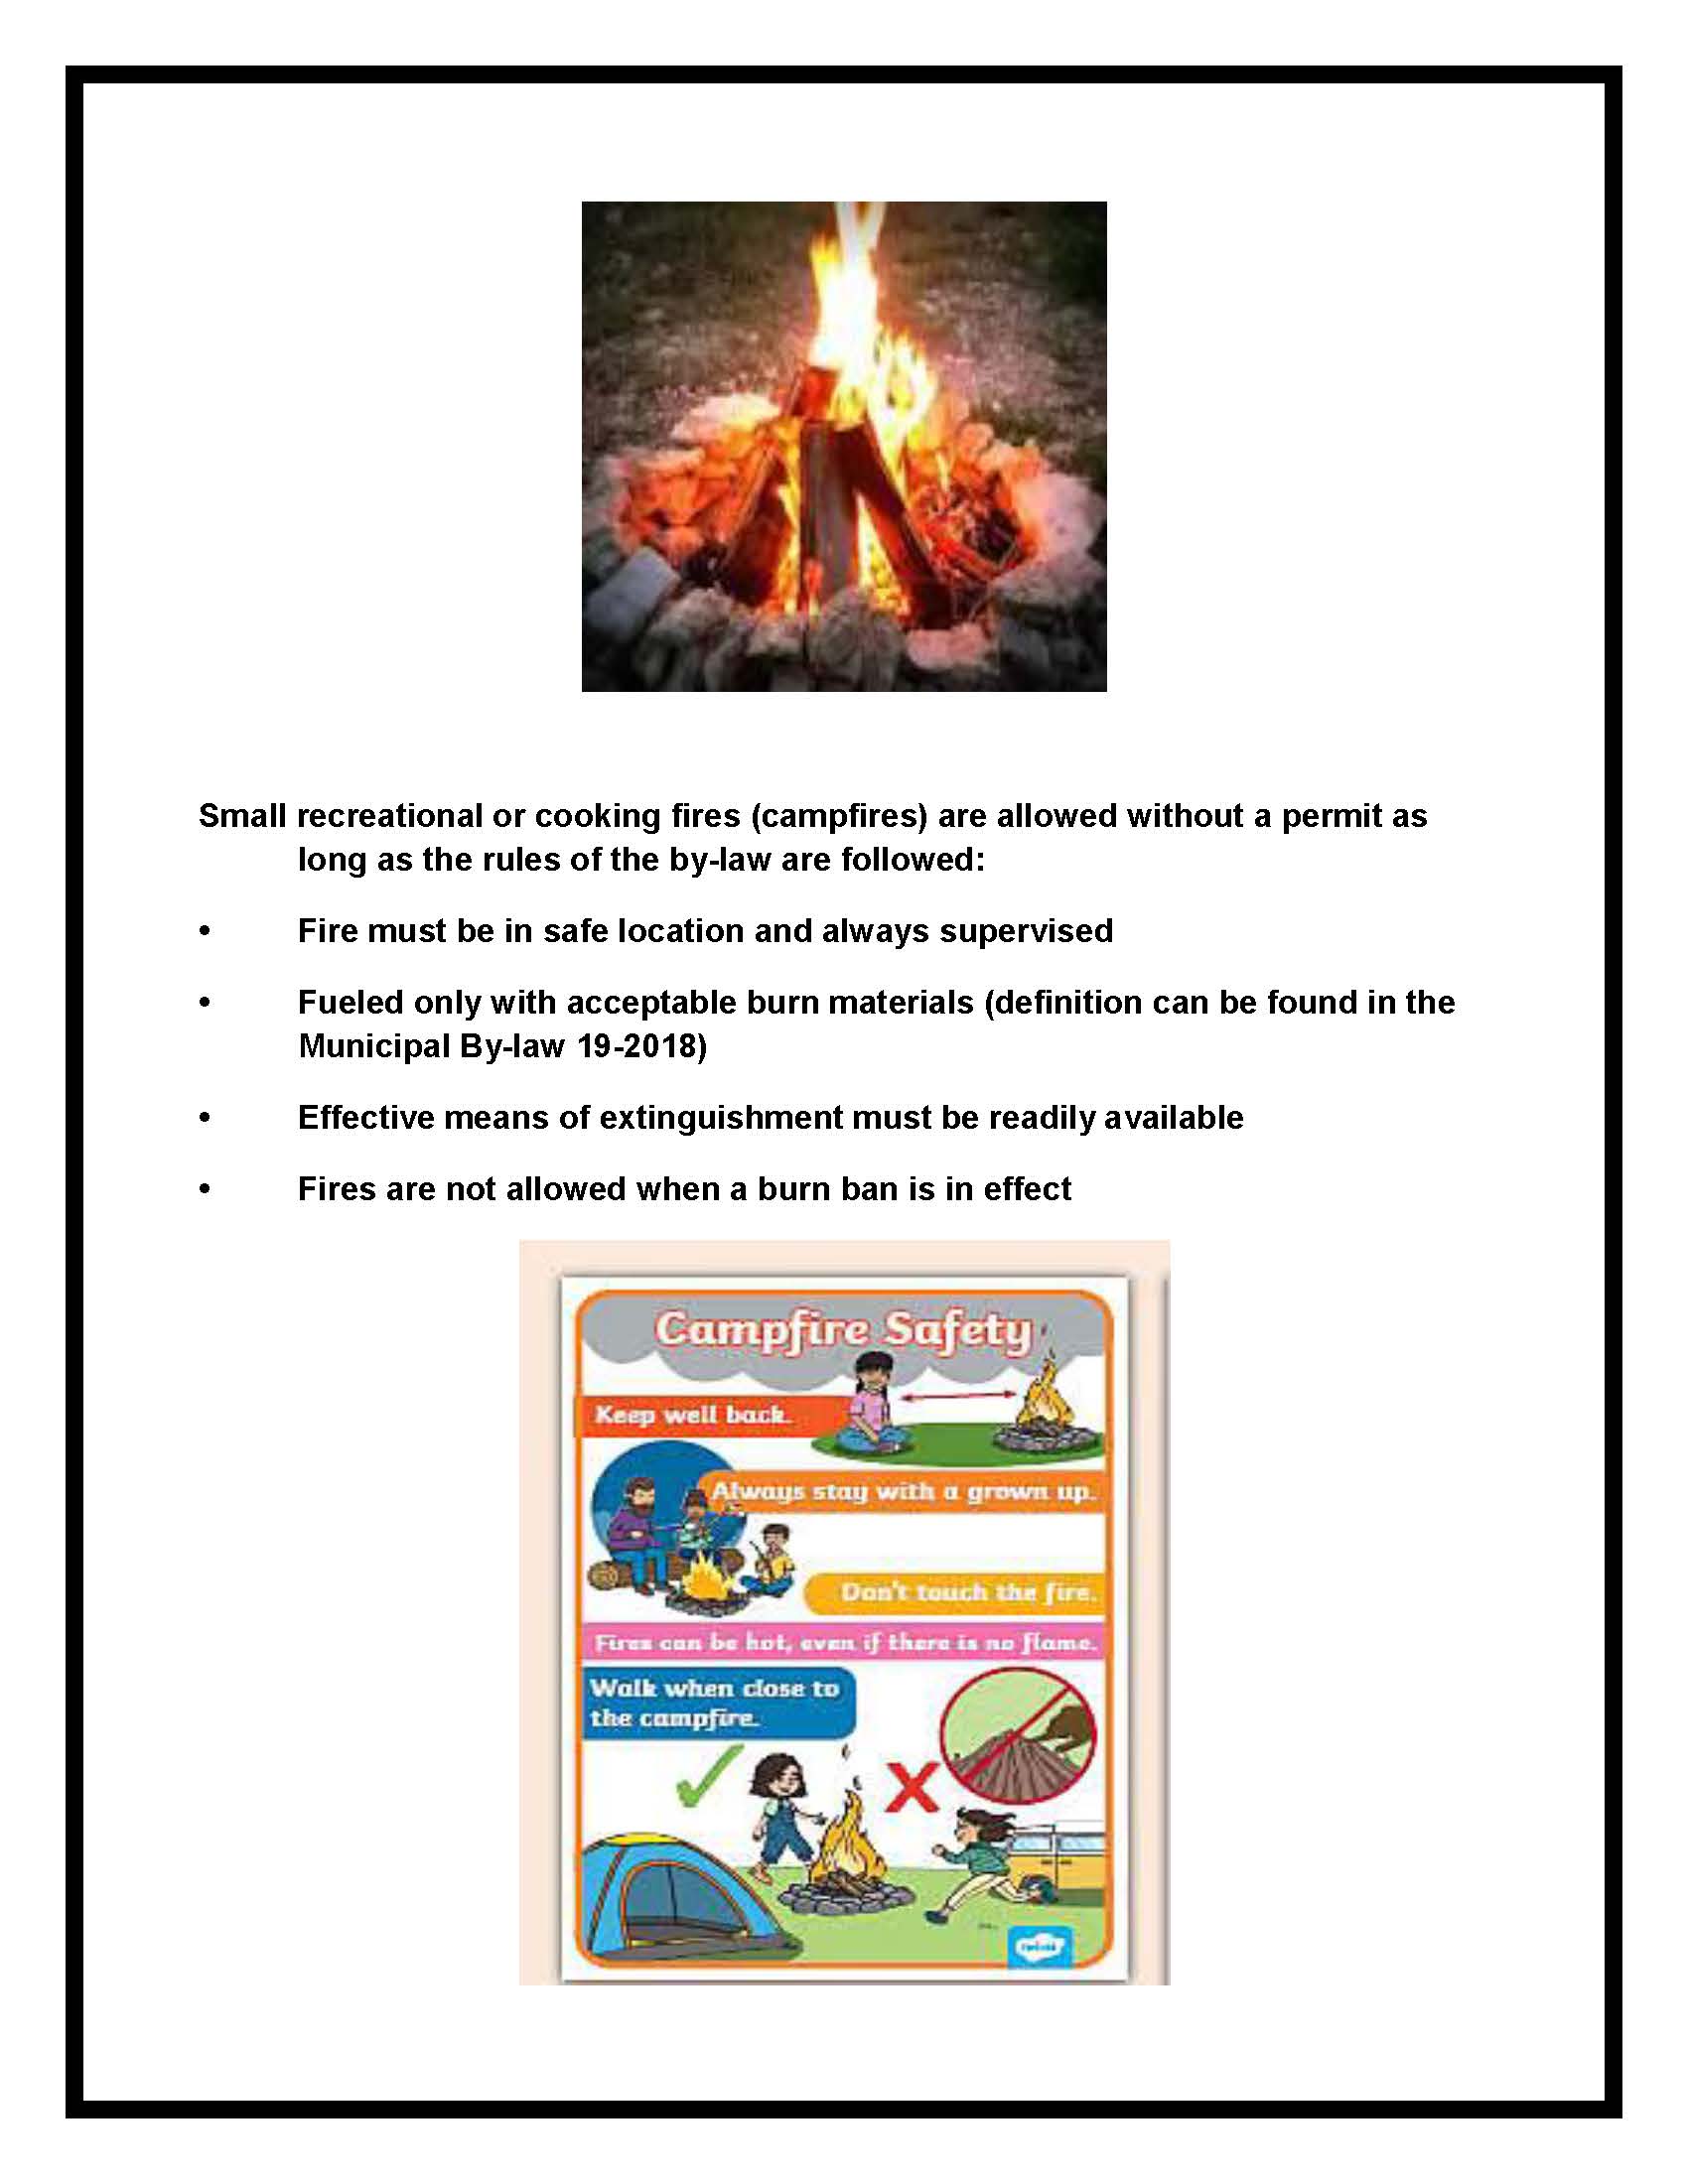 A Guide for Safe Recreational Campfires 